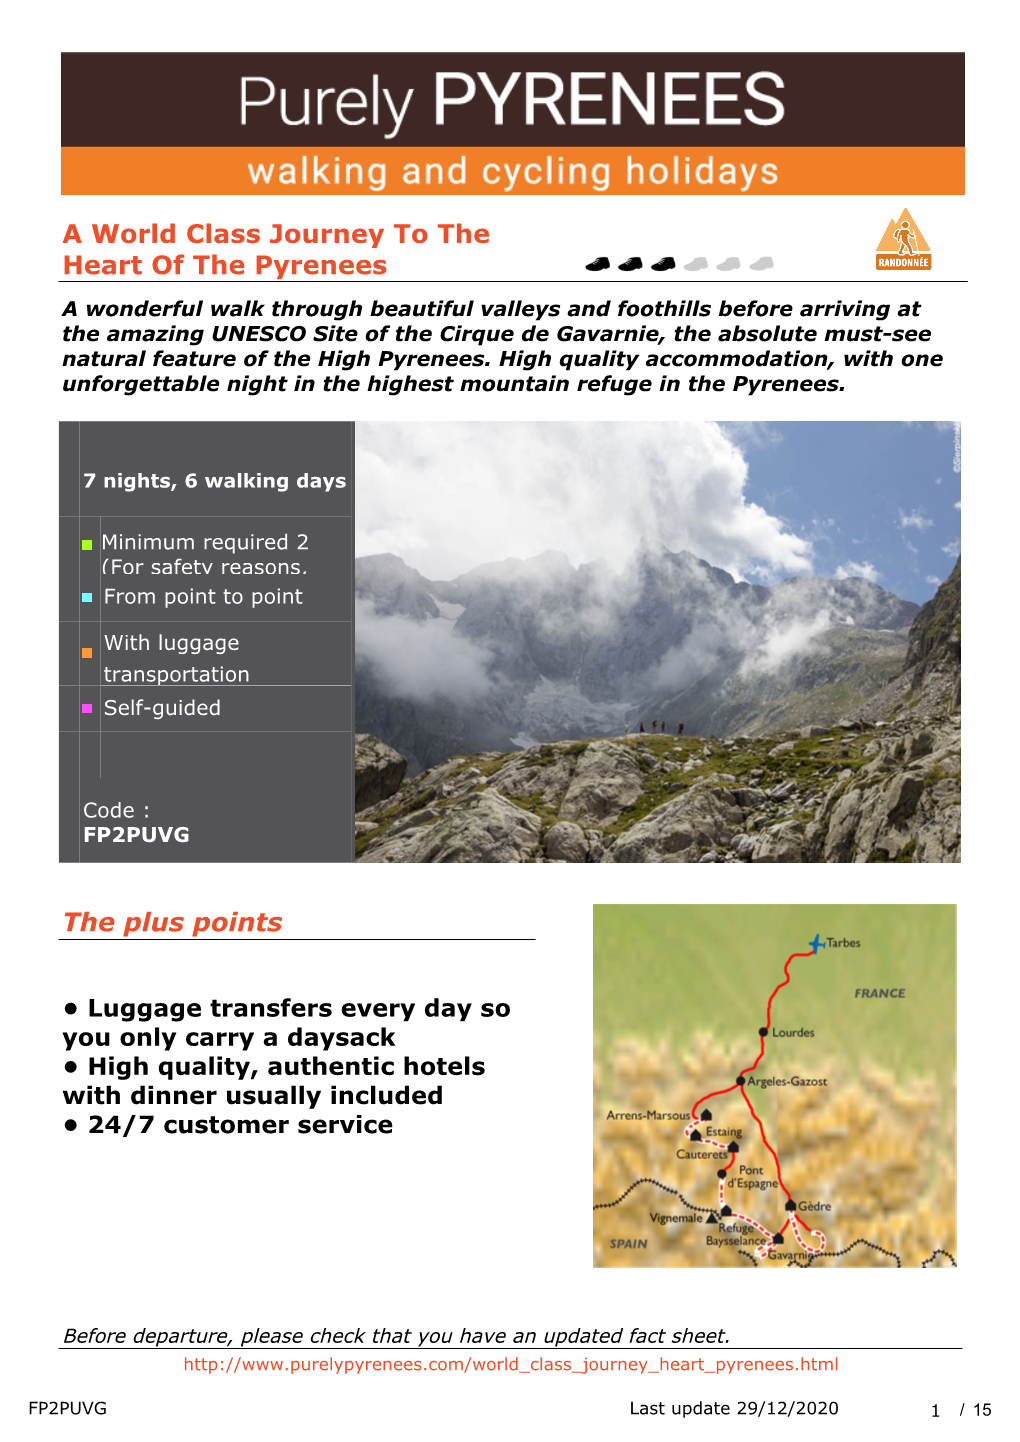 A World Class Journey to the Heart of the Pyrenees the Plus Points